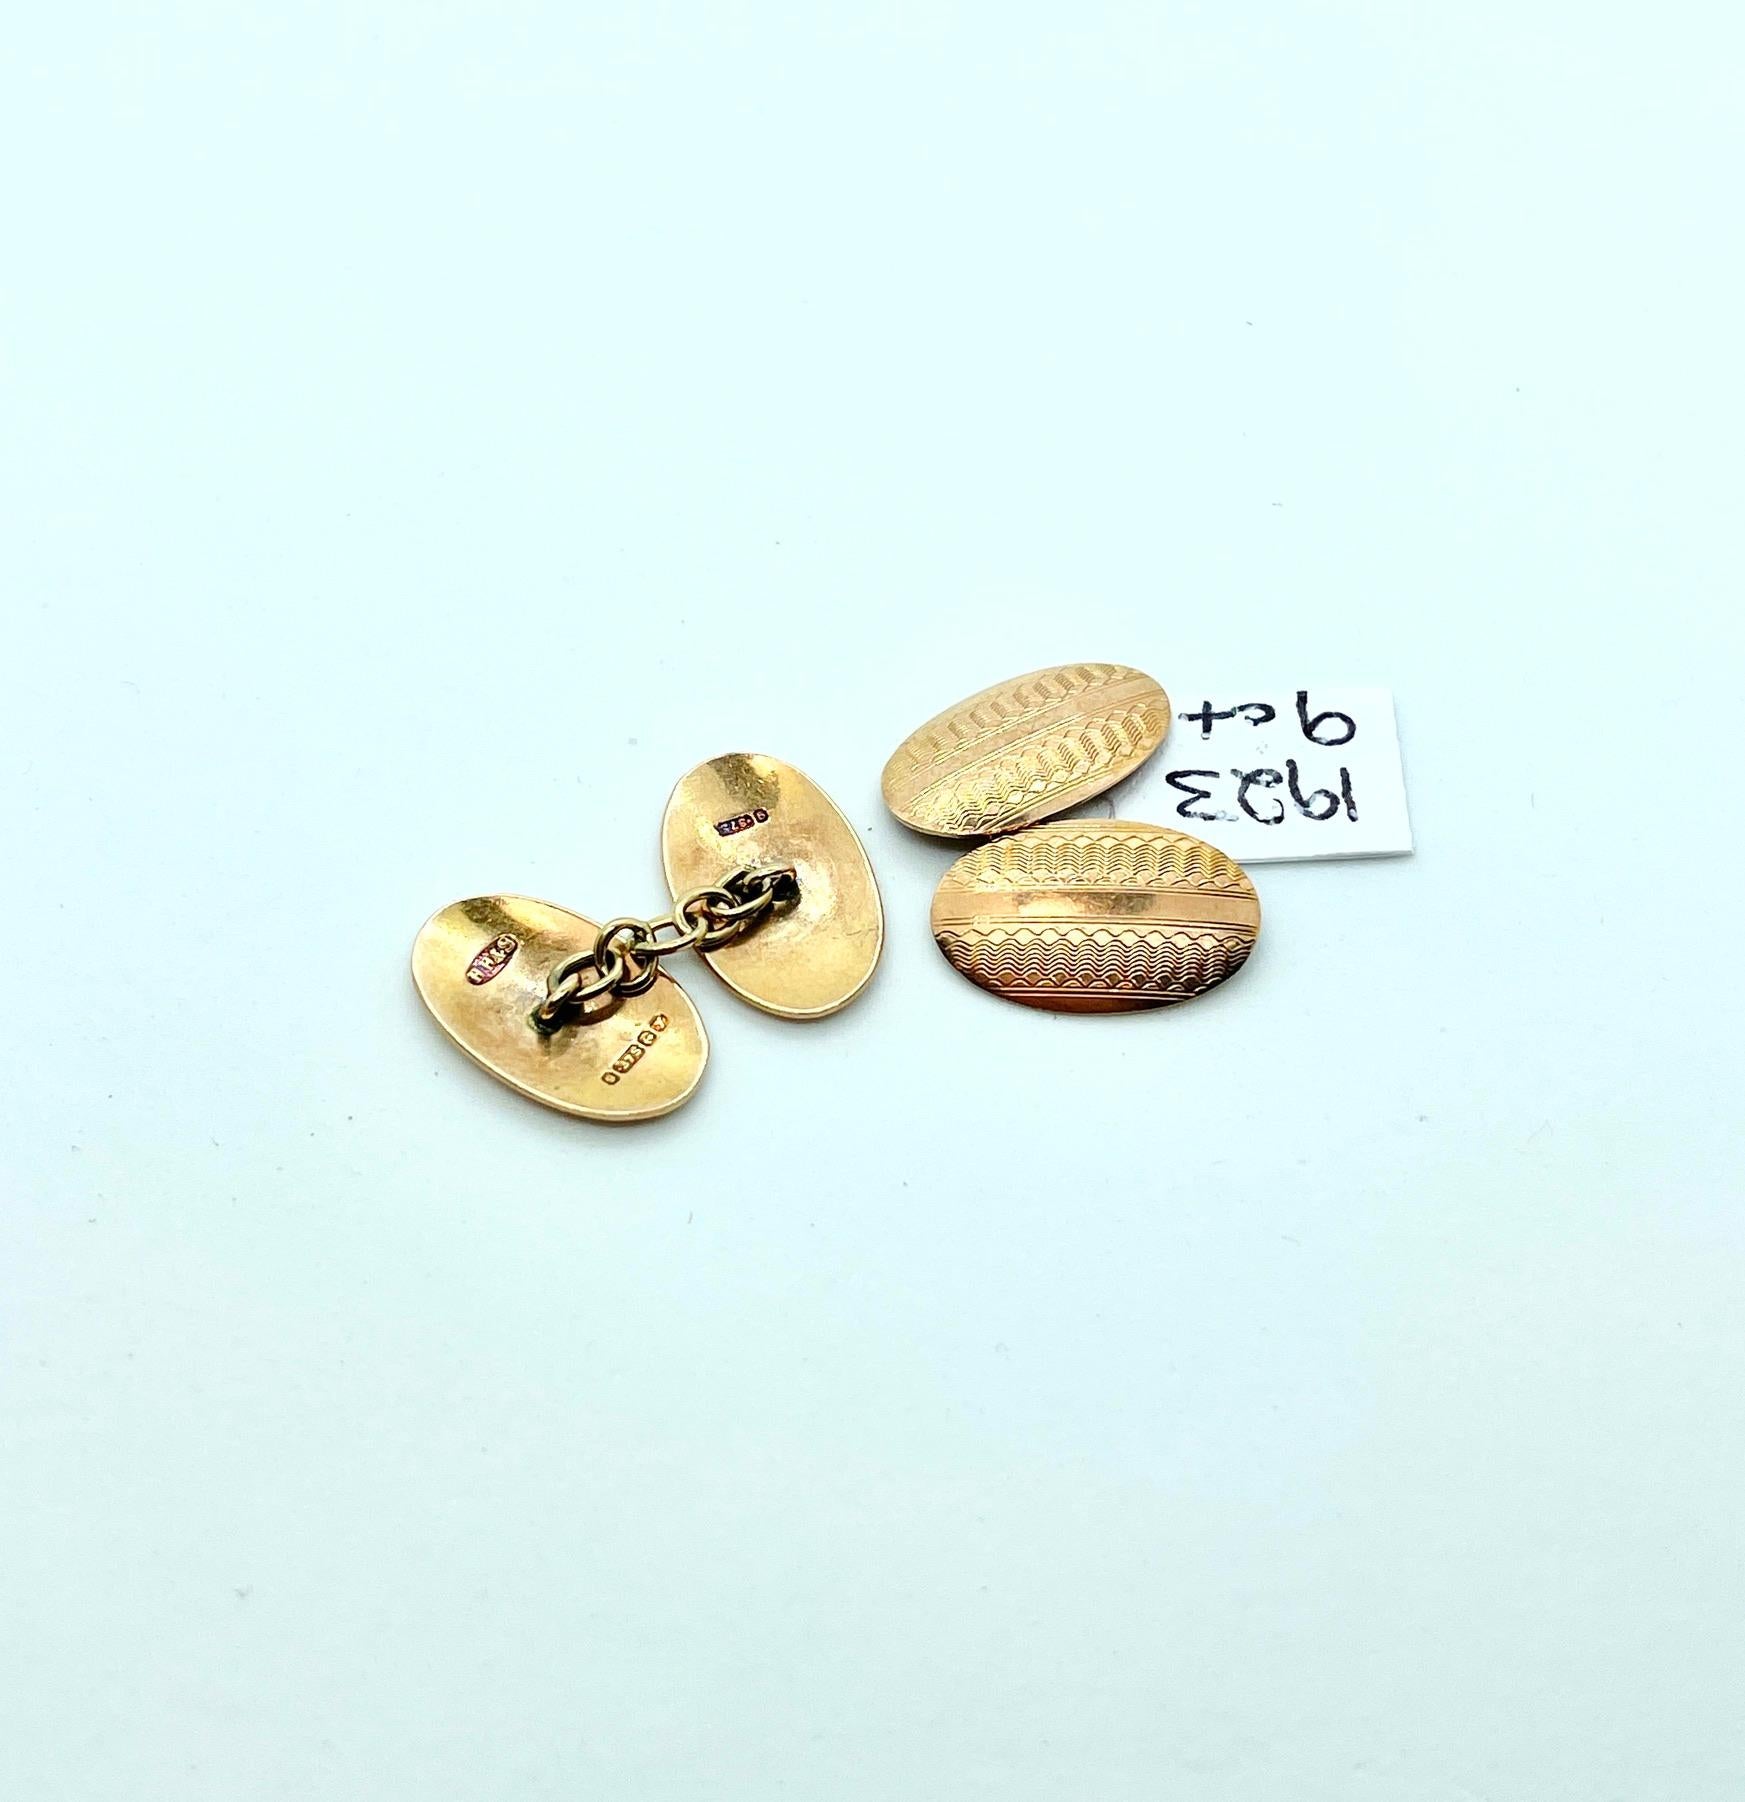 A fine pair of 9ct gold cufflinks , great Art Deco styling and hallmarks for Birmingham 1923 plus the makers mark H H & S, Henry Hobson and Sons. They are oval in shape with nice machine turned pattern and are connected with a gold link